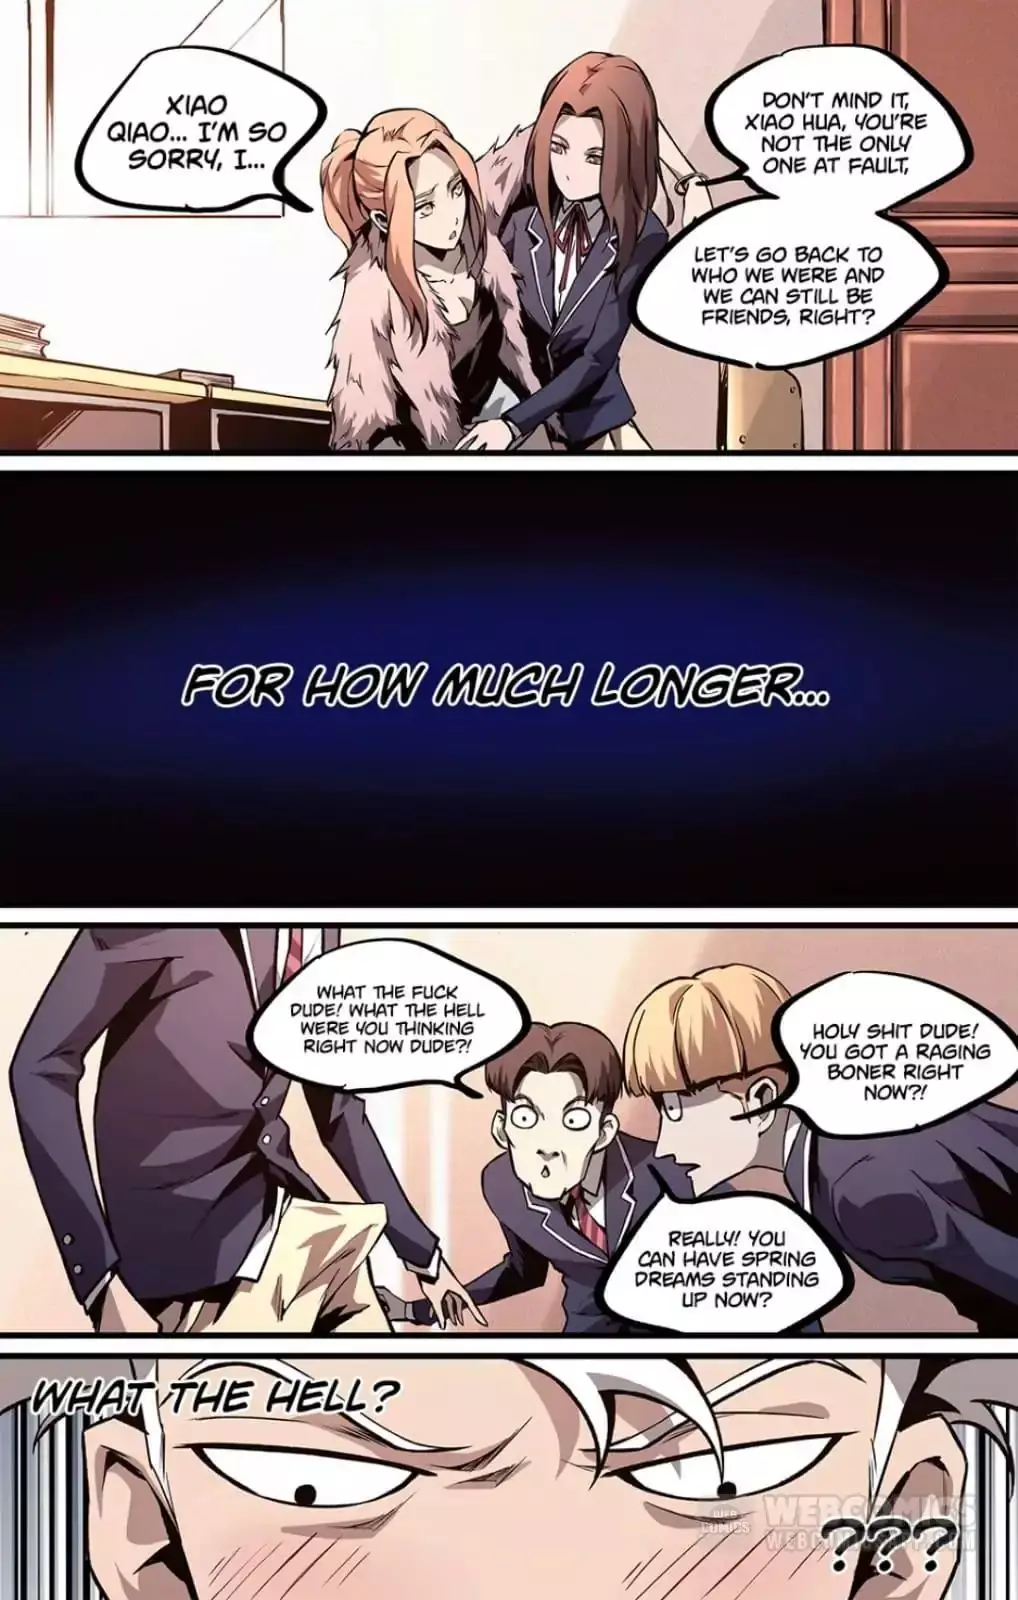 Lawless Zone - 24 page 3-295be25d